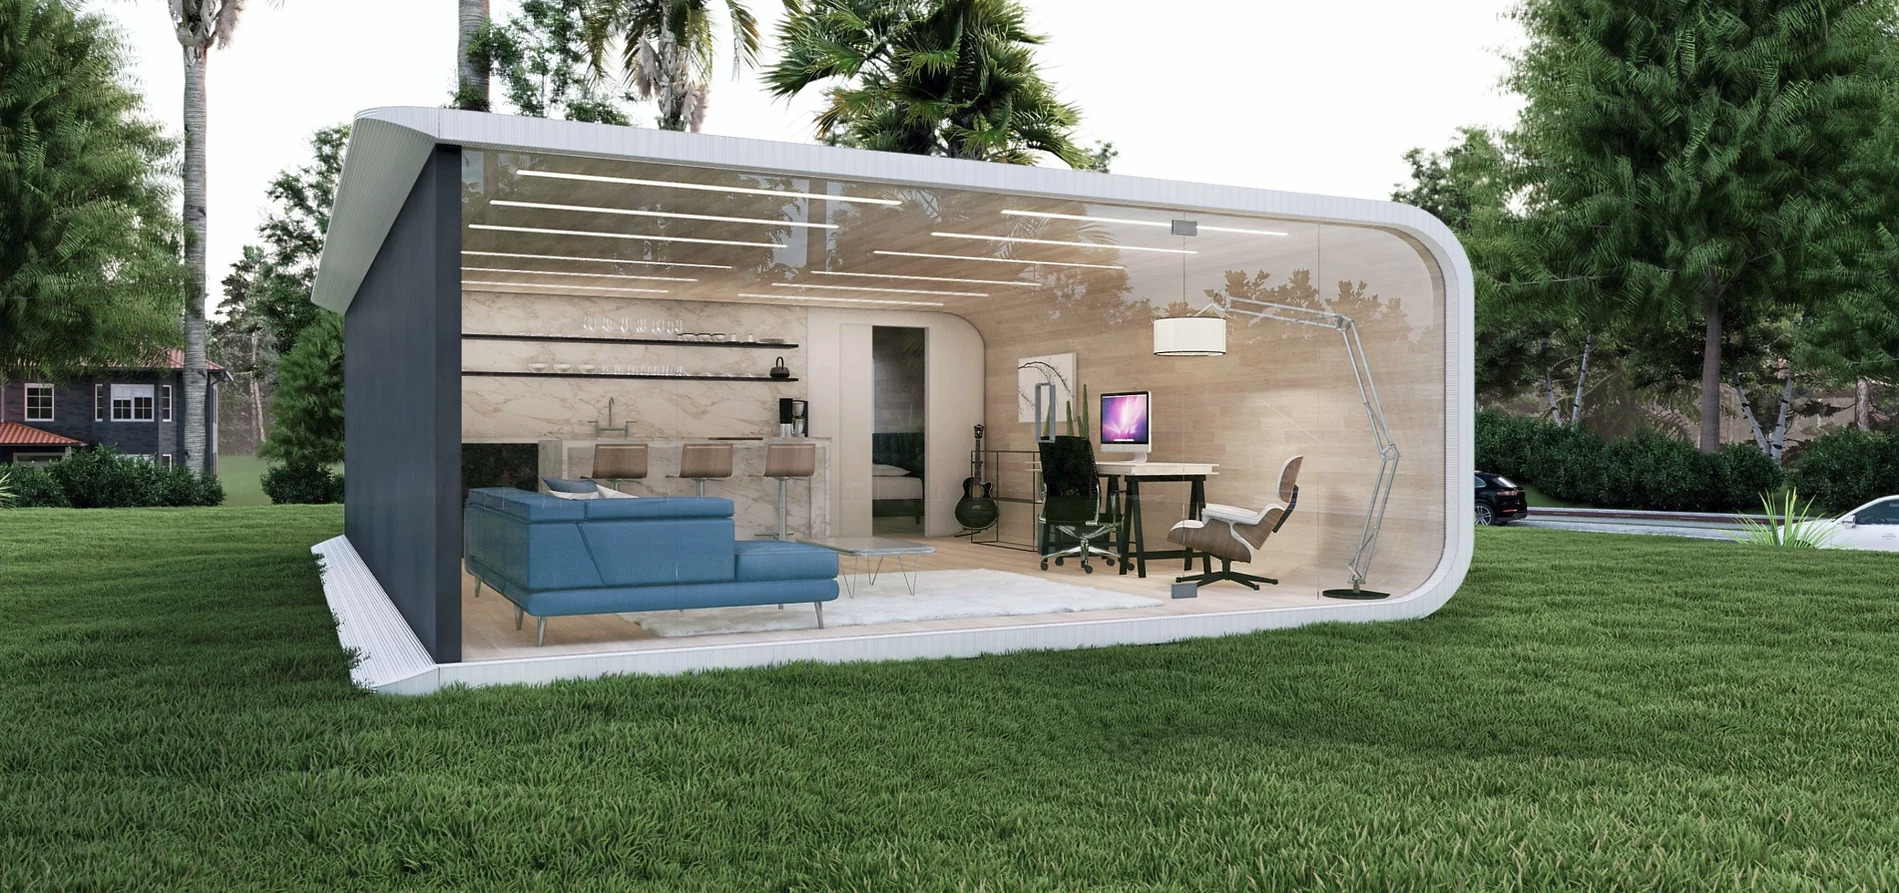 A startup builds studio homes in their backyard with recycled plastic